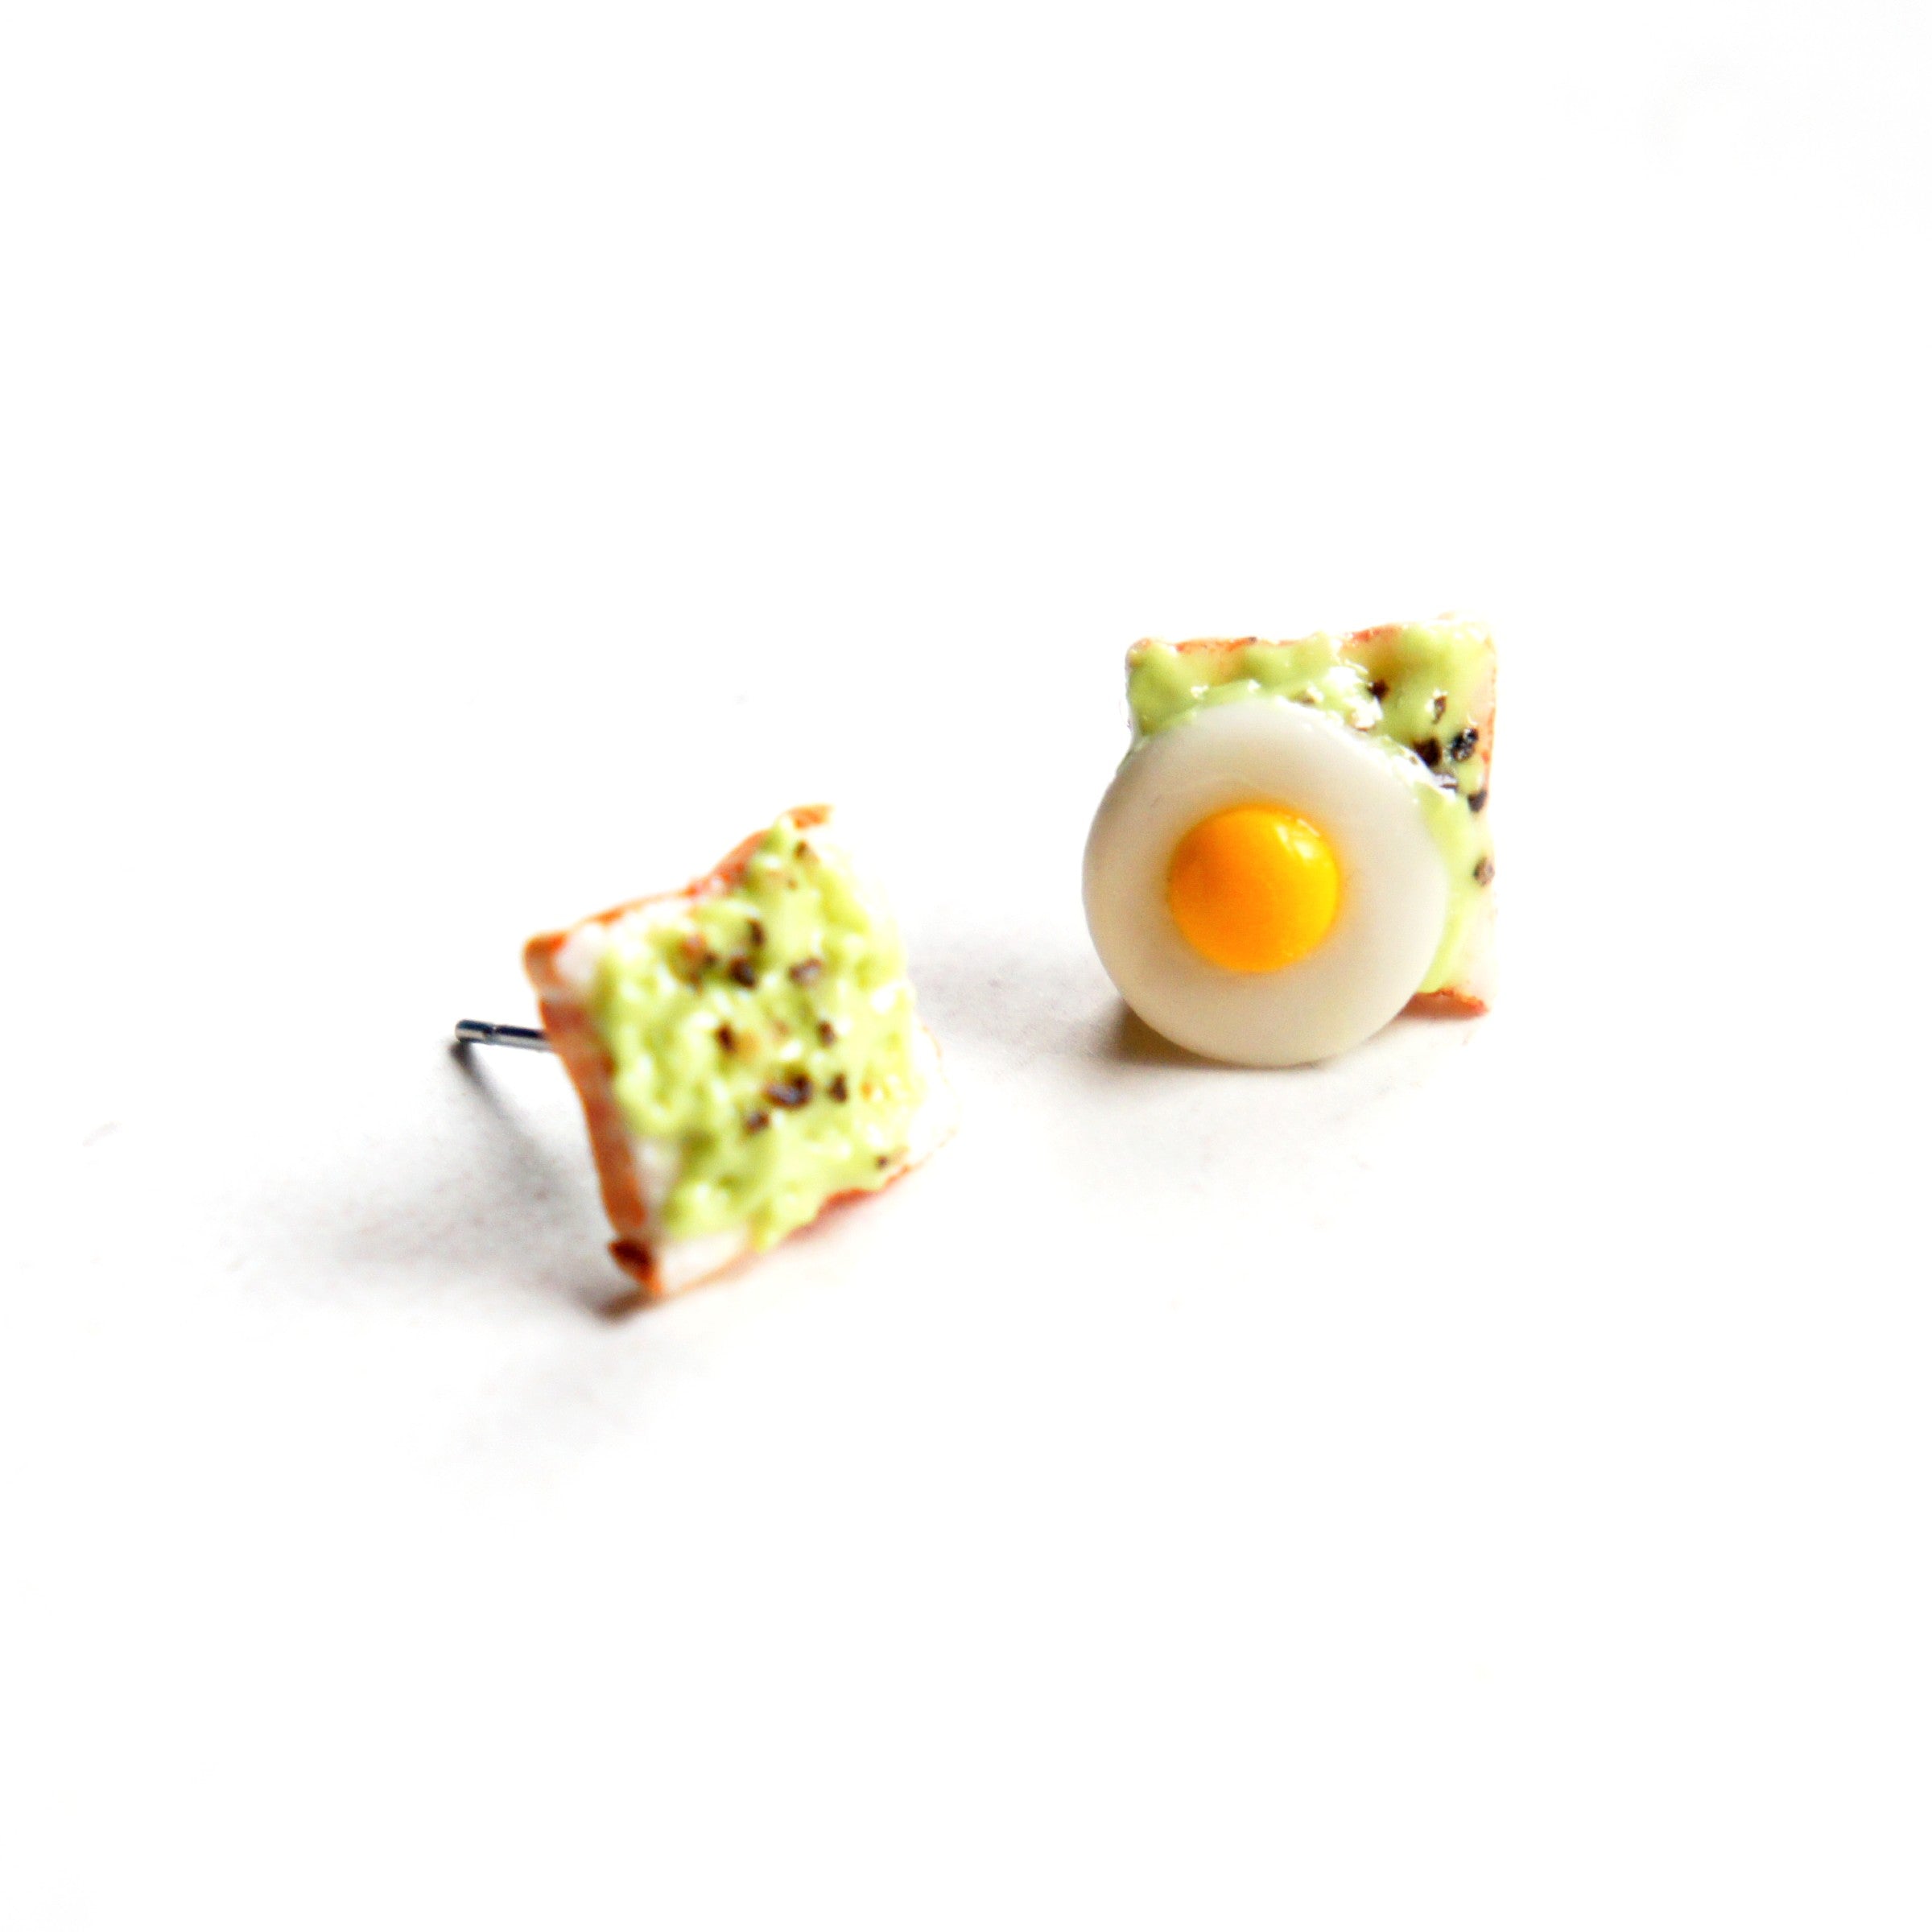 Avocado Toast Stud Earrings - Jillicious charms and accessories